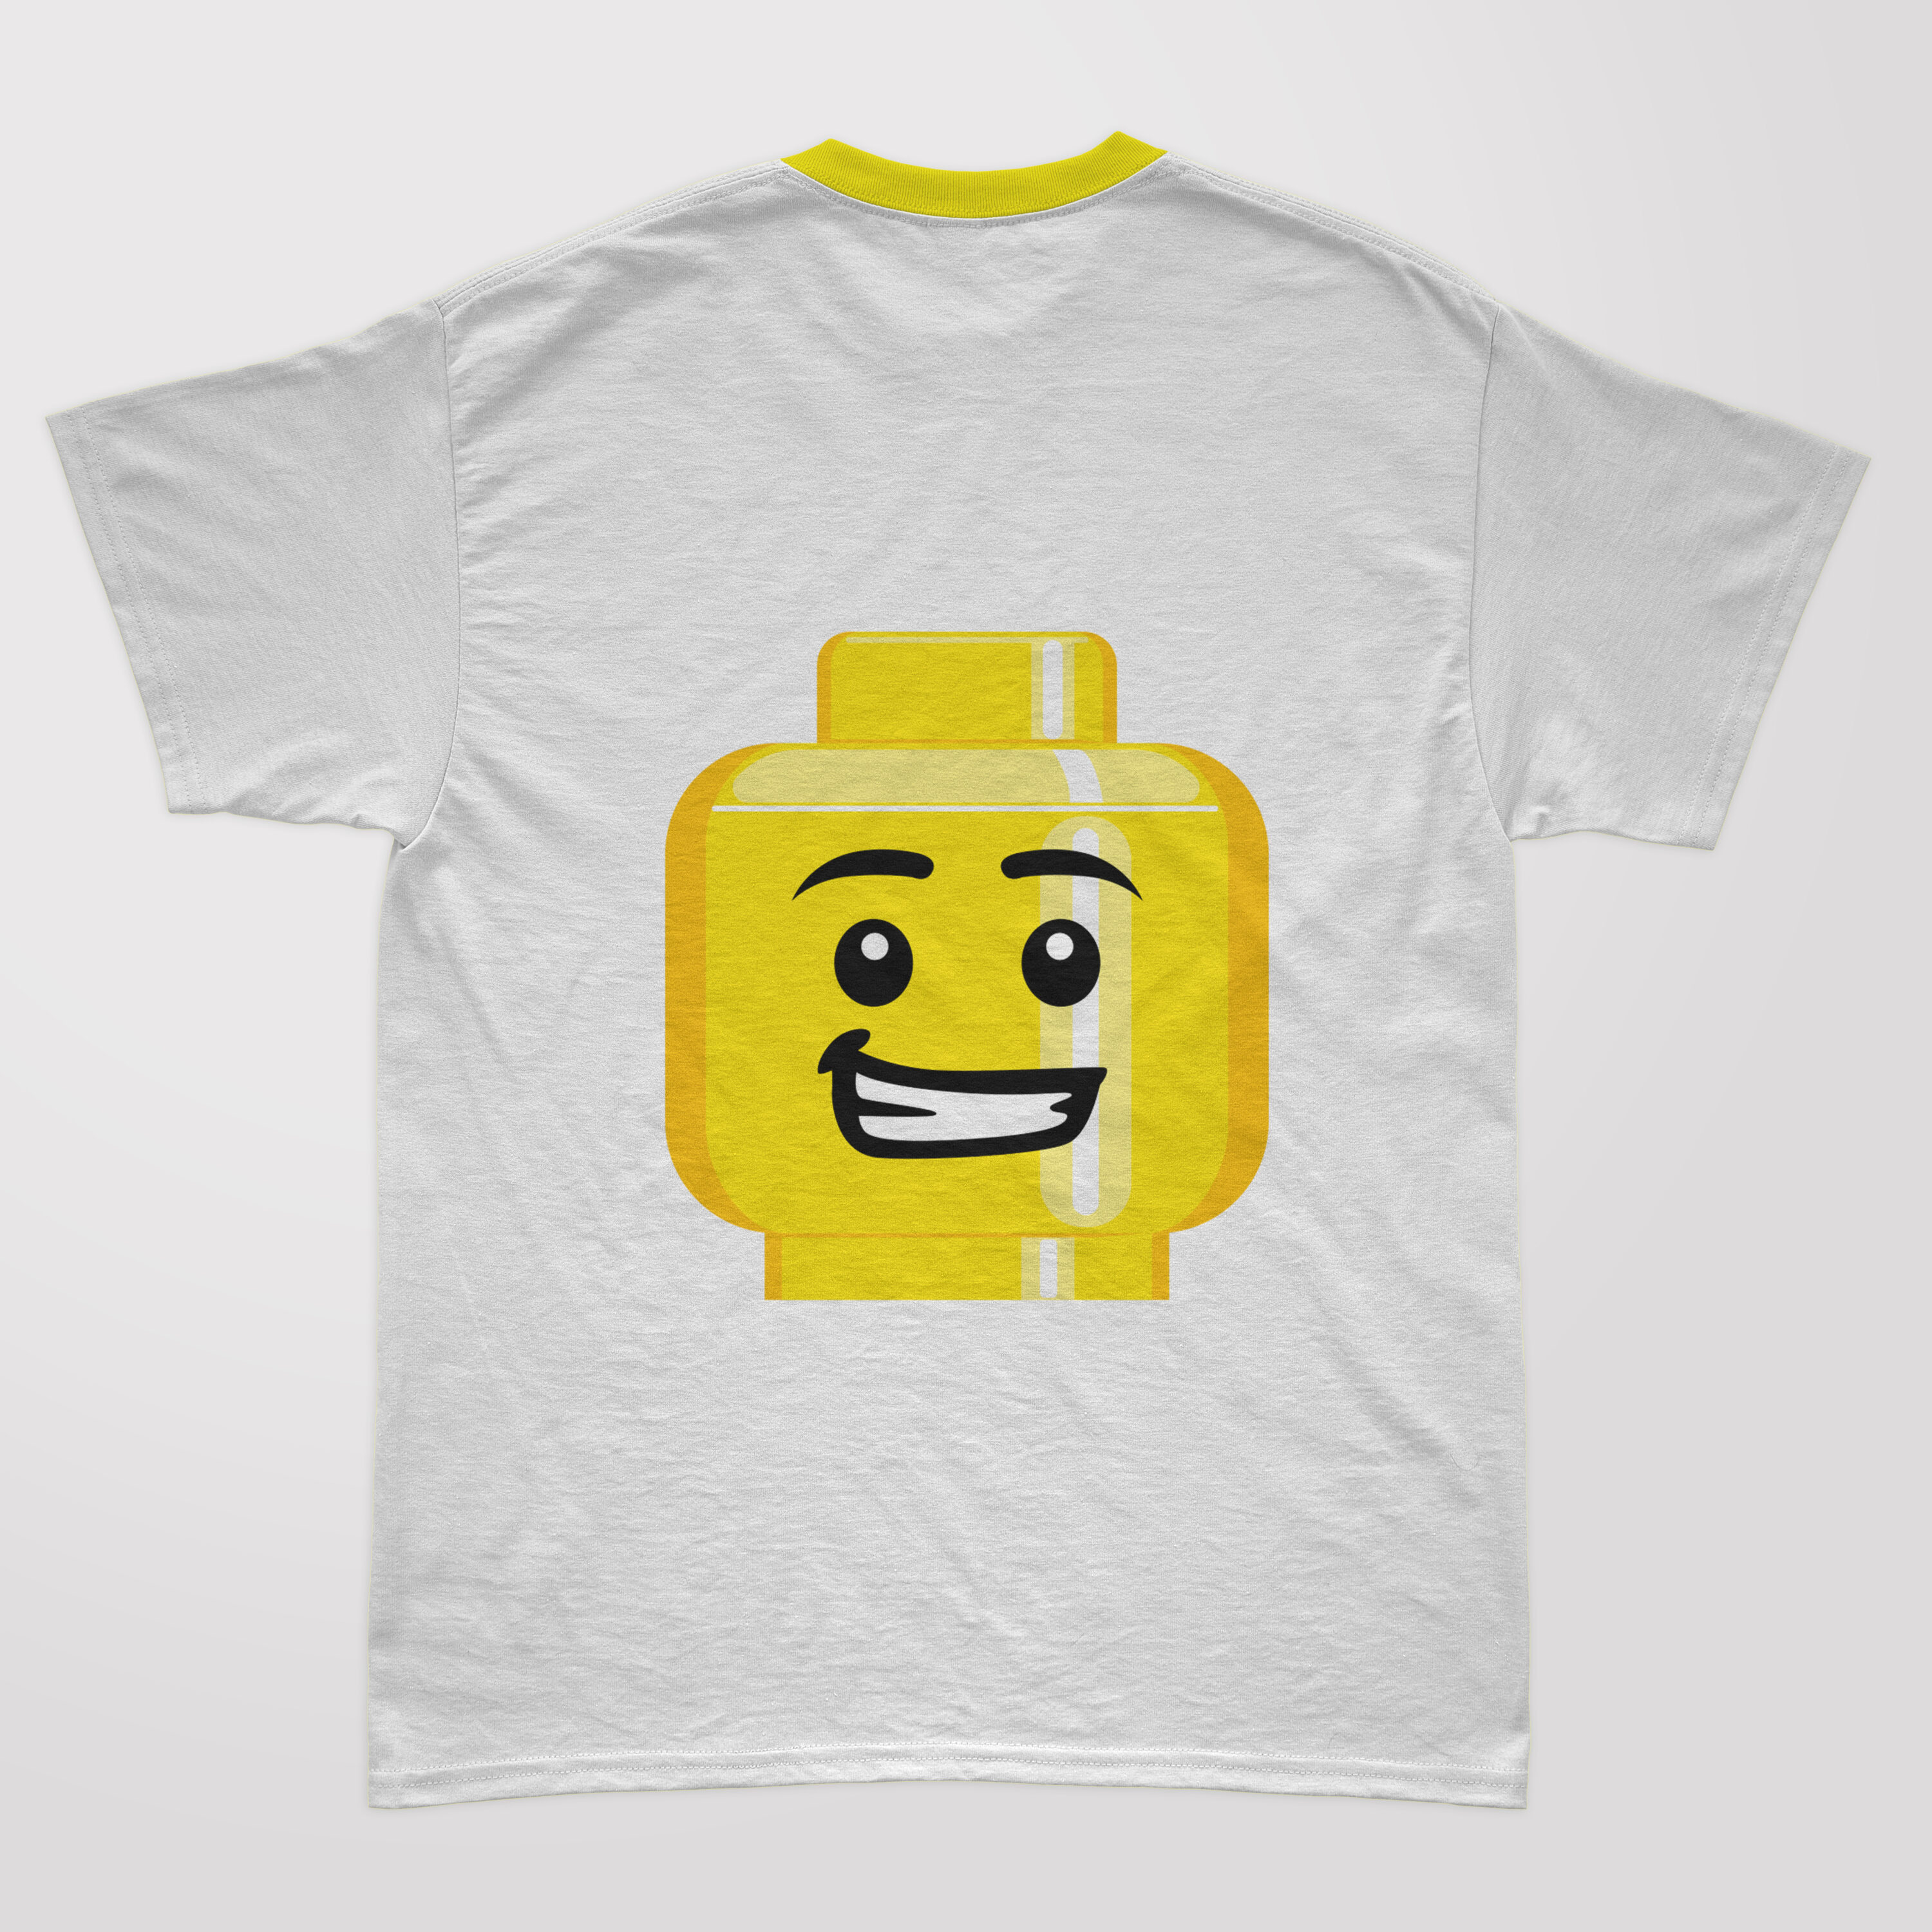 The main lego with a smile.